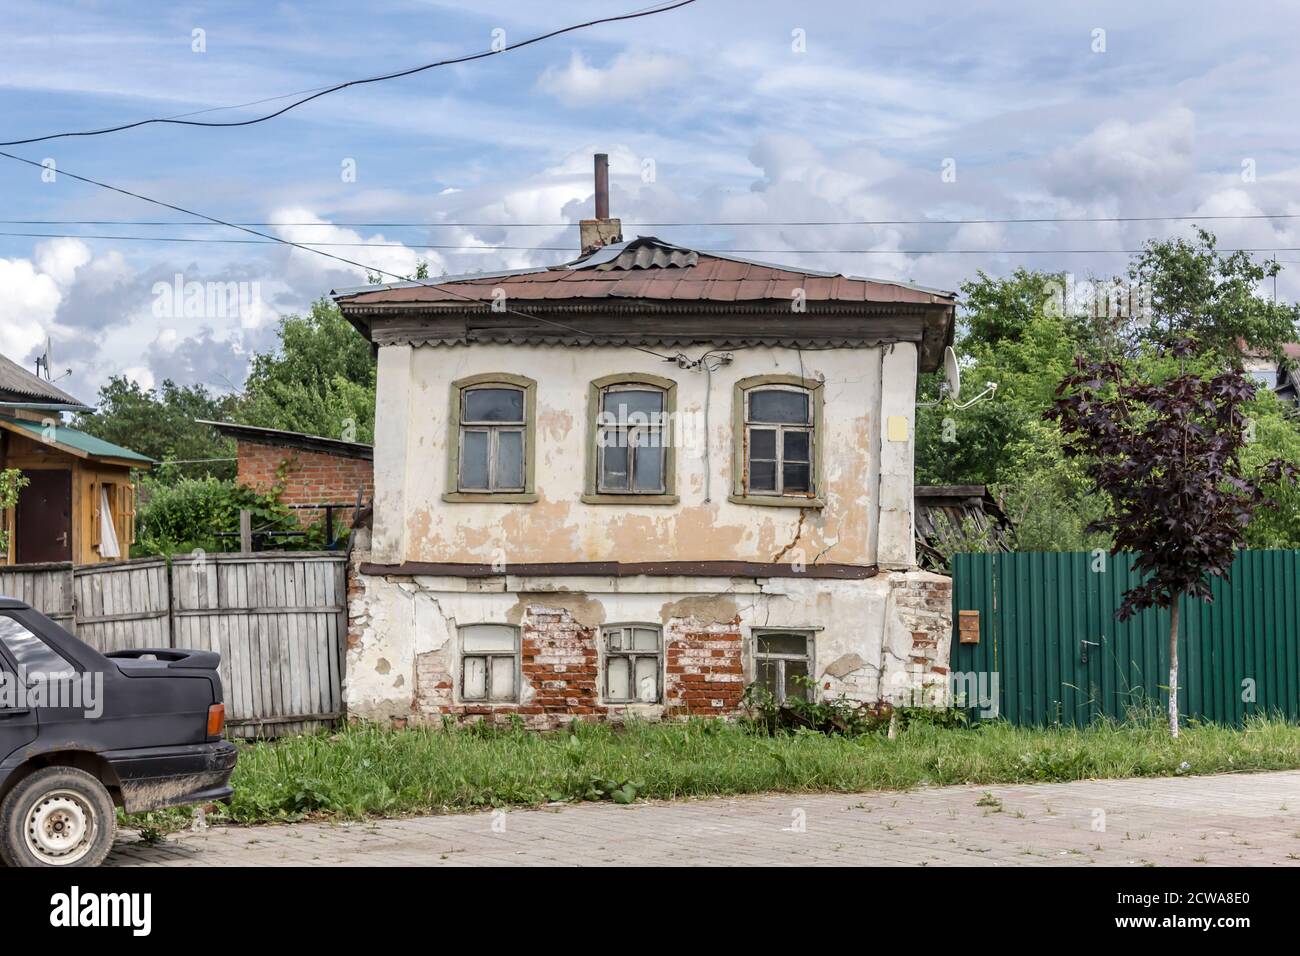 Old abandoned brick house. Nineteenth century architecture. Provincial town of Borovsk in Russia. Stock Photo